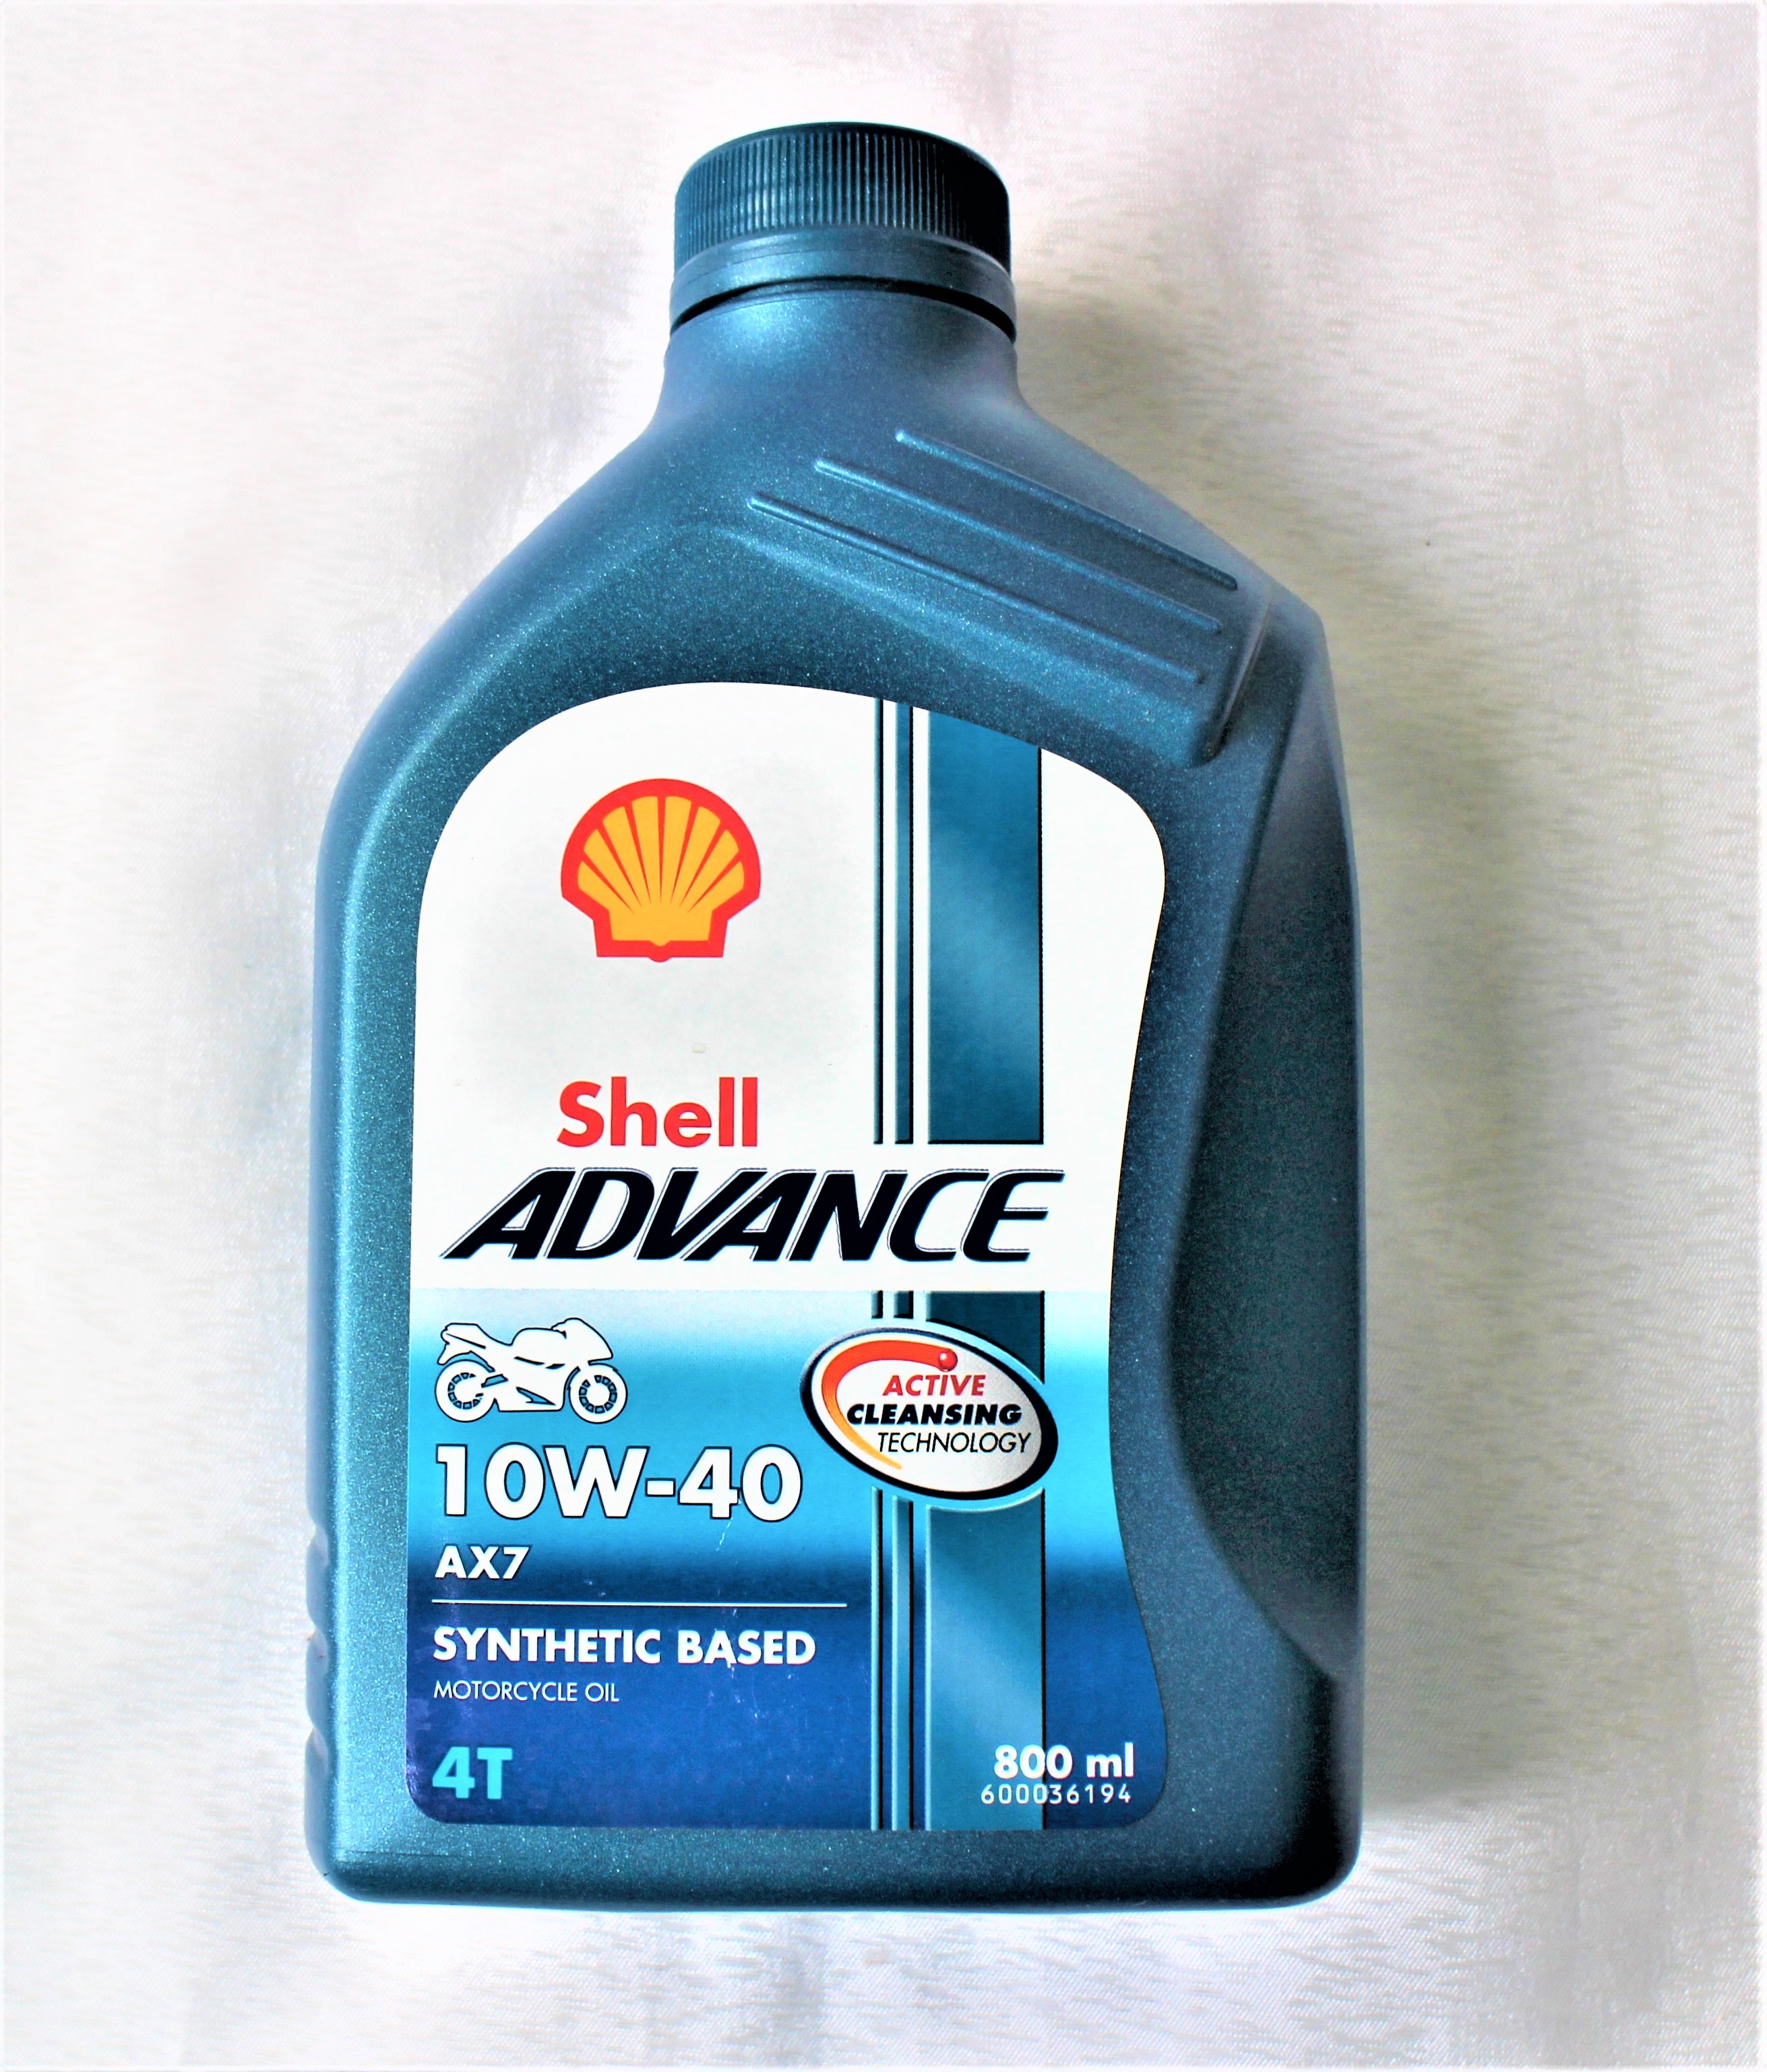 ORIGINAL SHELL ADVANCE 4T SYNTHETIC BASED MOTORYCLE OIL 10W-40 AX7 (800 .